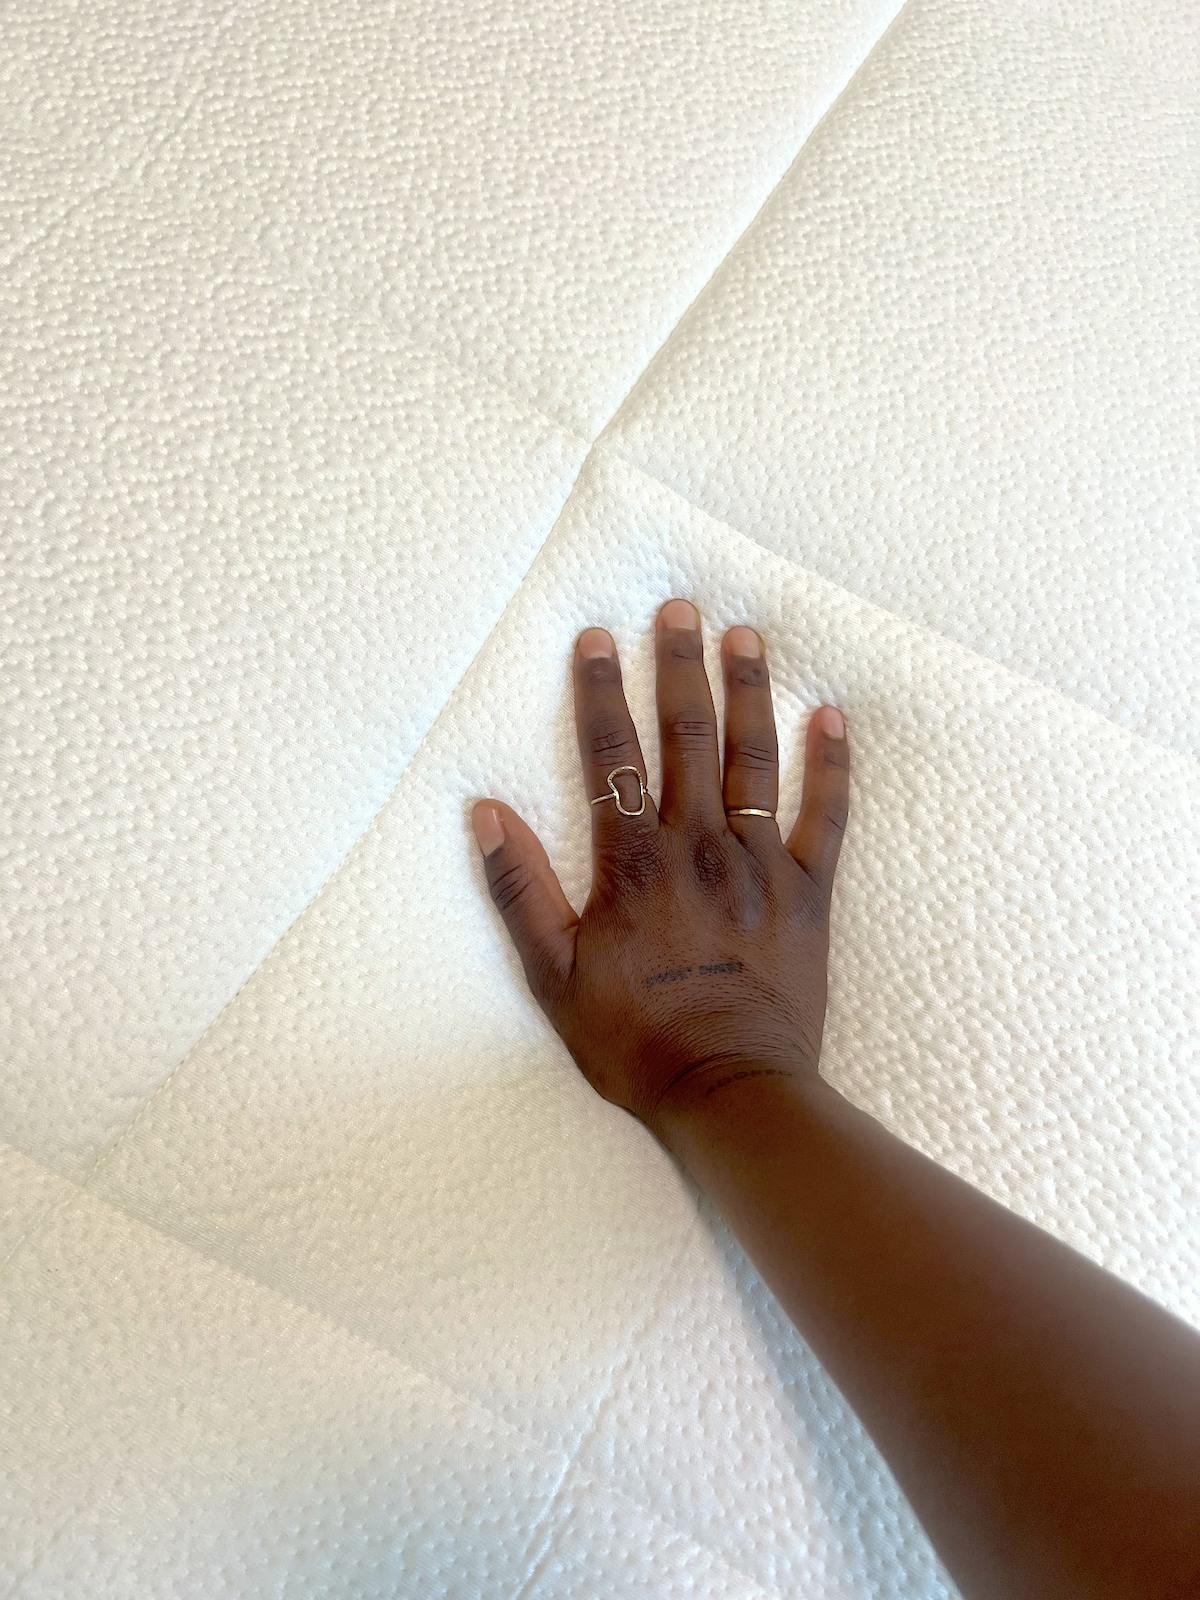 A hand with rings presses down on a white, textured surface, revealing the gentle indentation of fingers on an organic mattress.